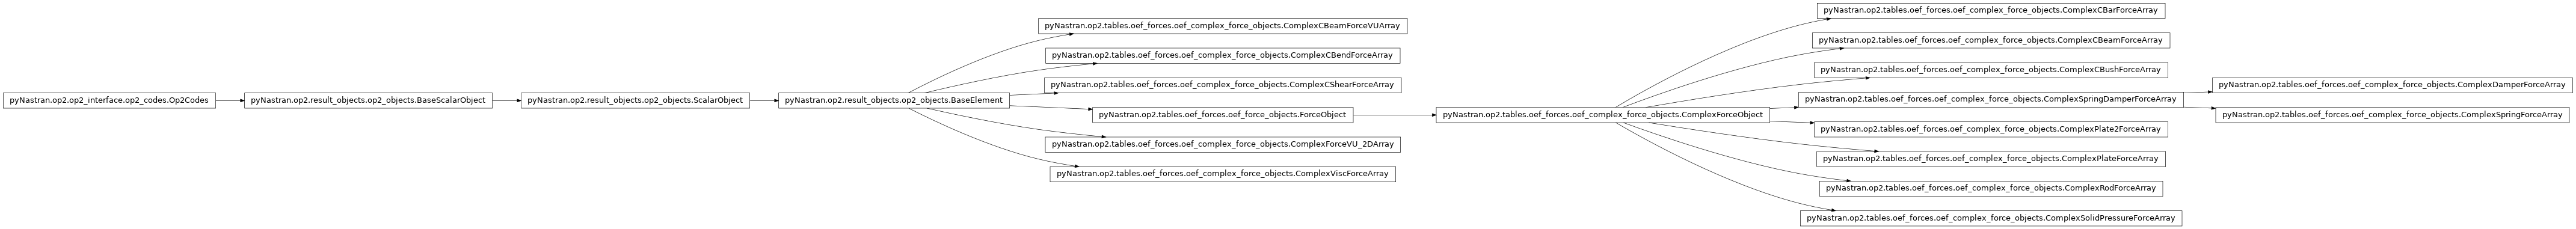 Inheritance diagram of pyNastran.op2.tables.oef_forces.oef_complex_force_objects